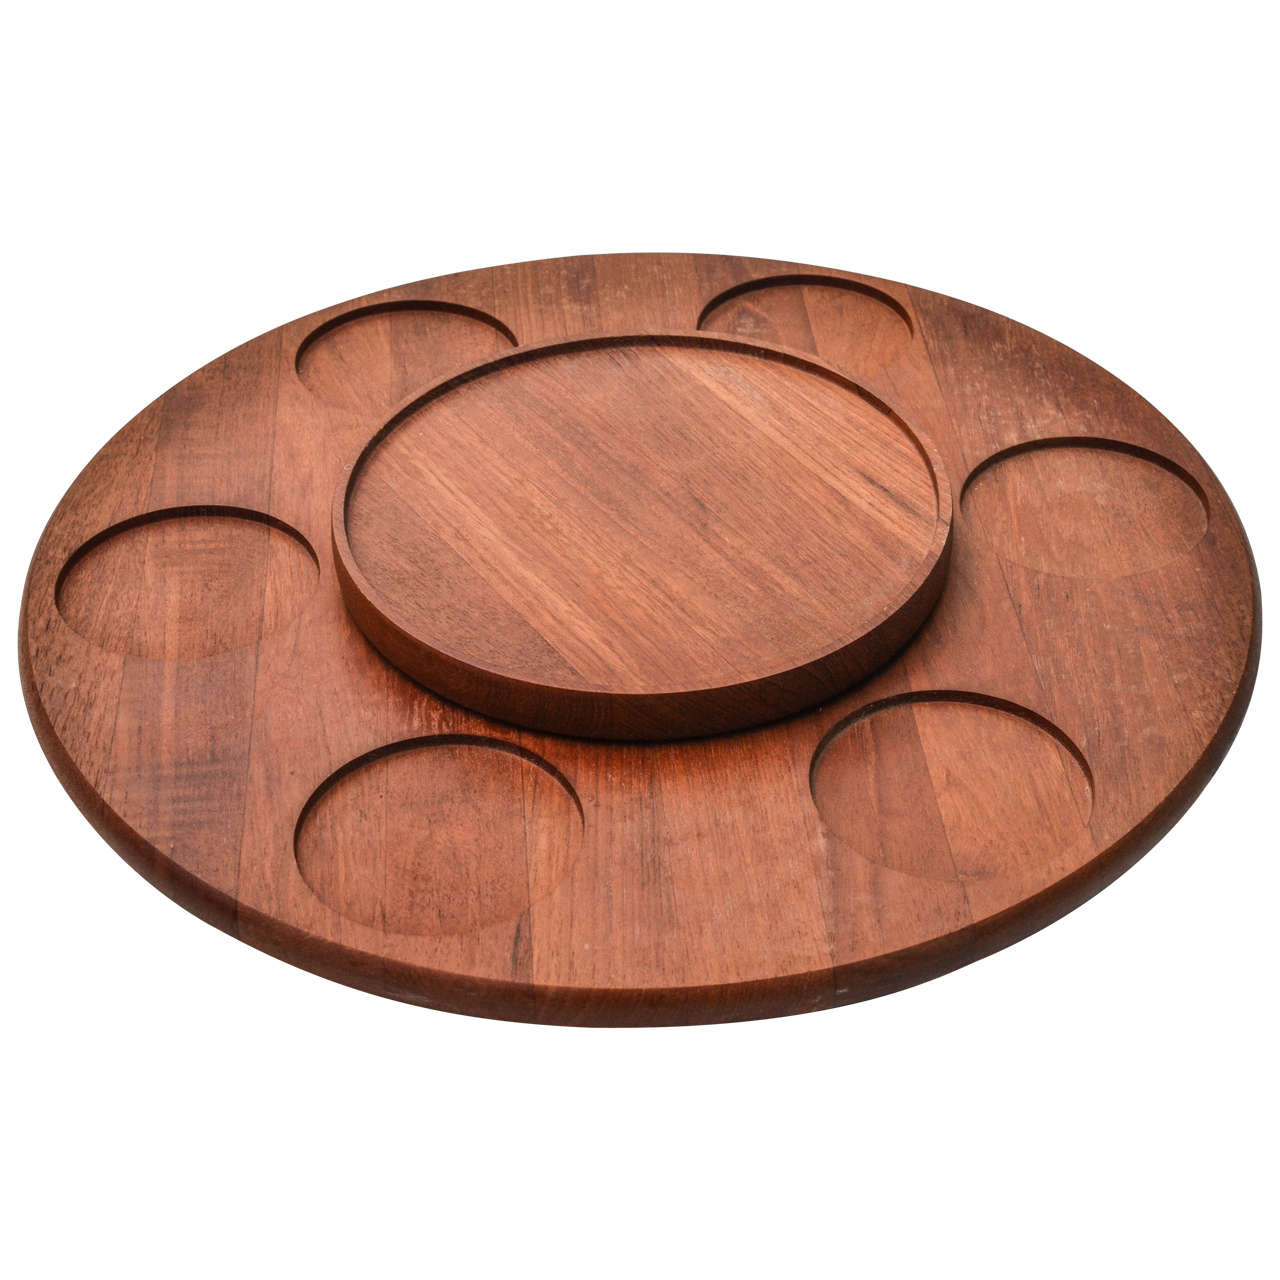 Danish Teak "Lazy Susan" with Original Stainless Steel Condiment Dishes